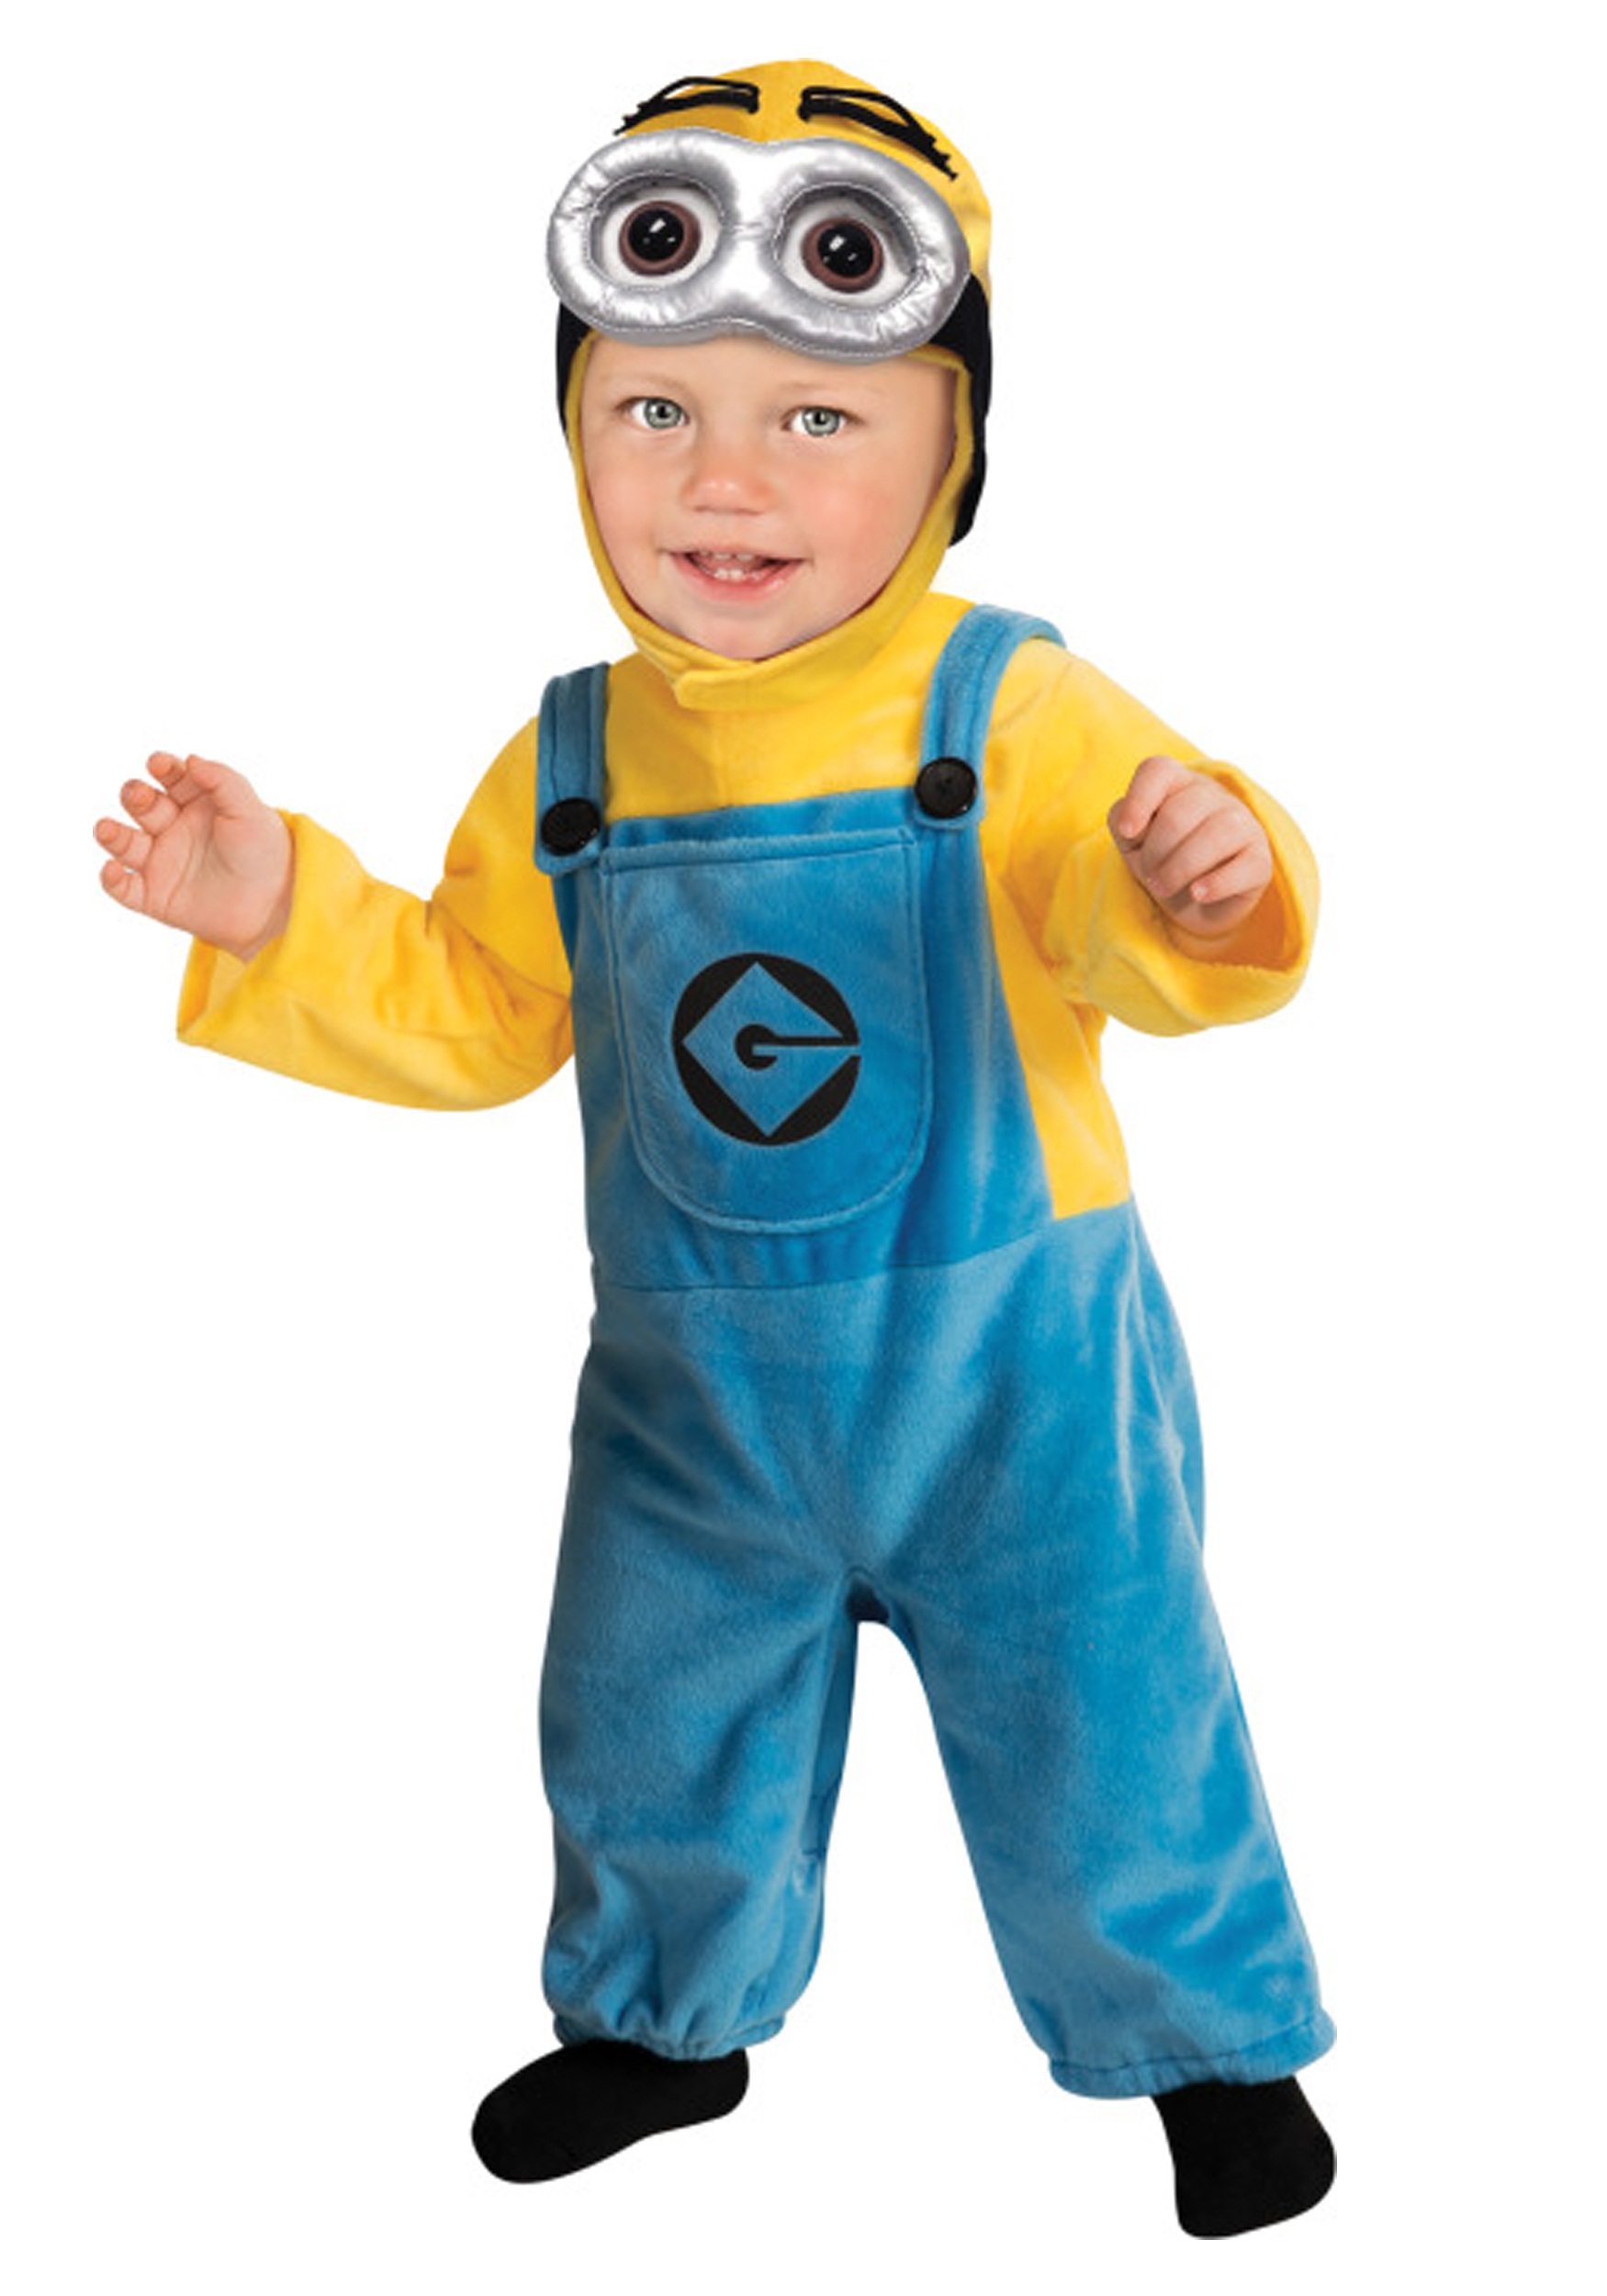 Minion Toddler, of your nightmares. (Image: Halloween Costumes)